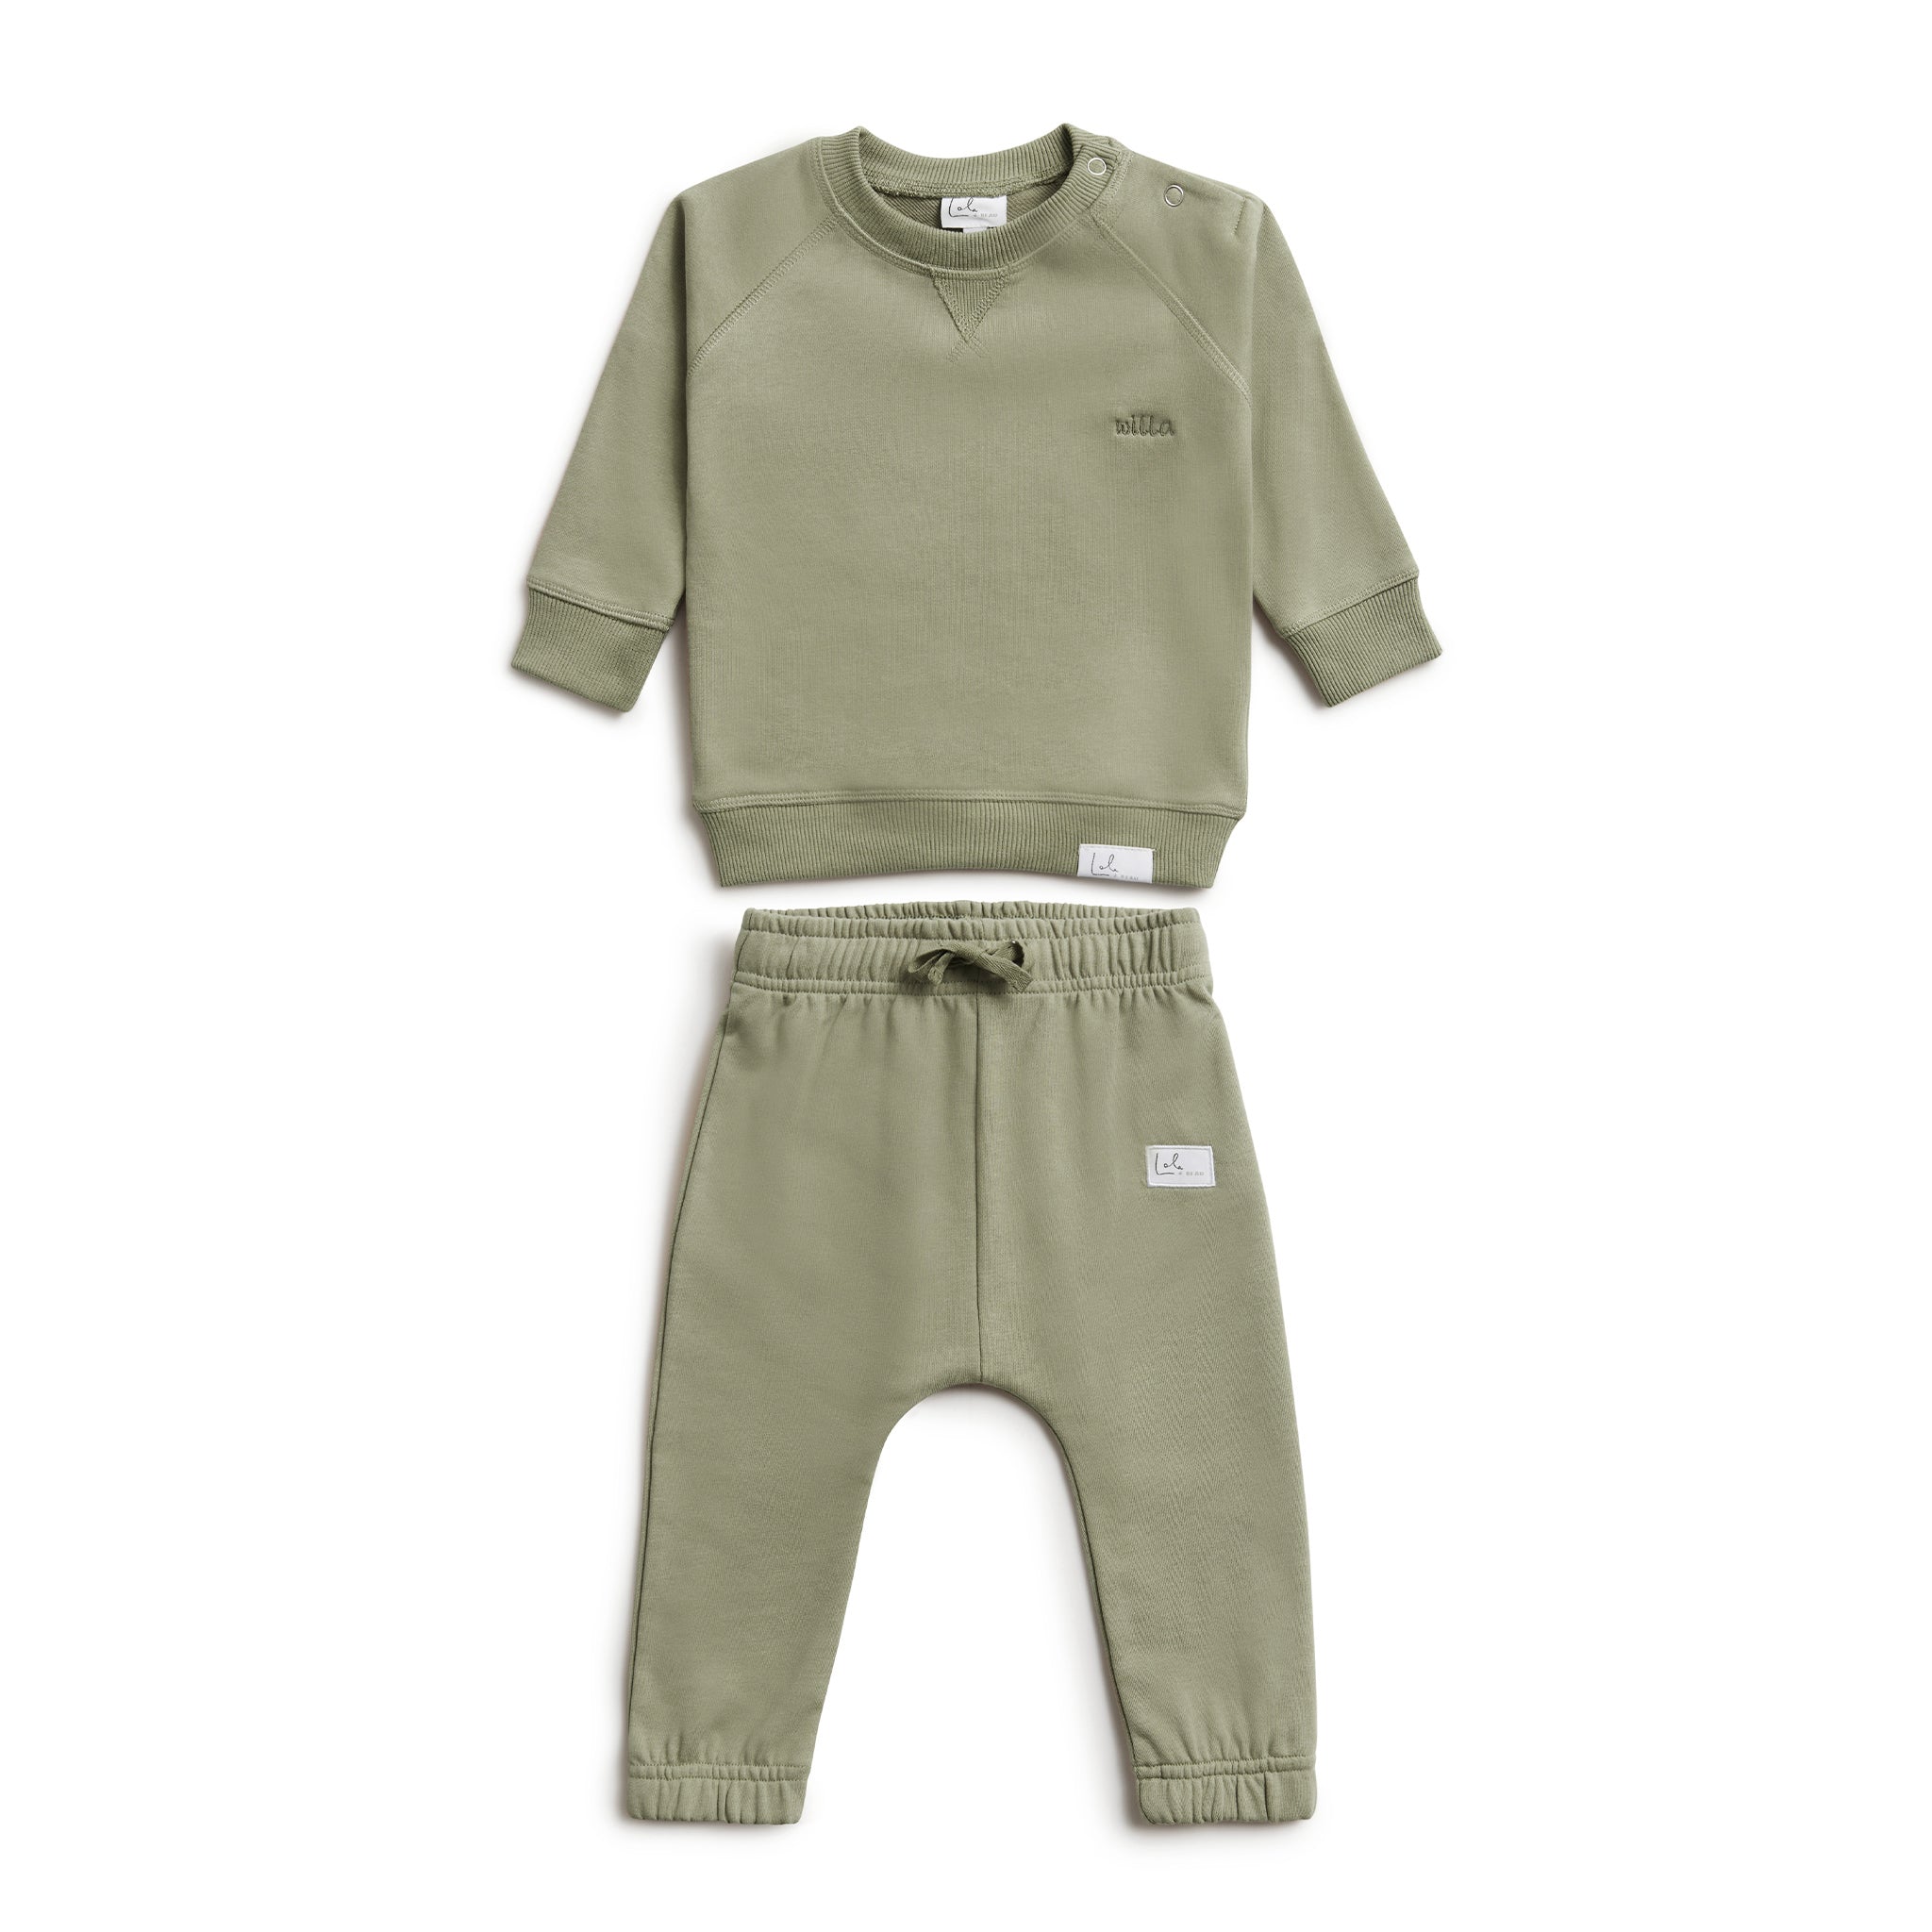 THE TRACKIE SET